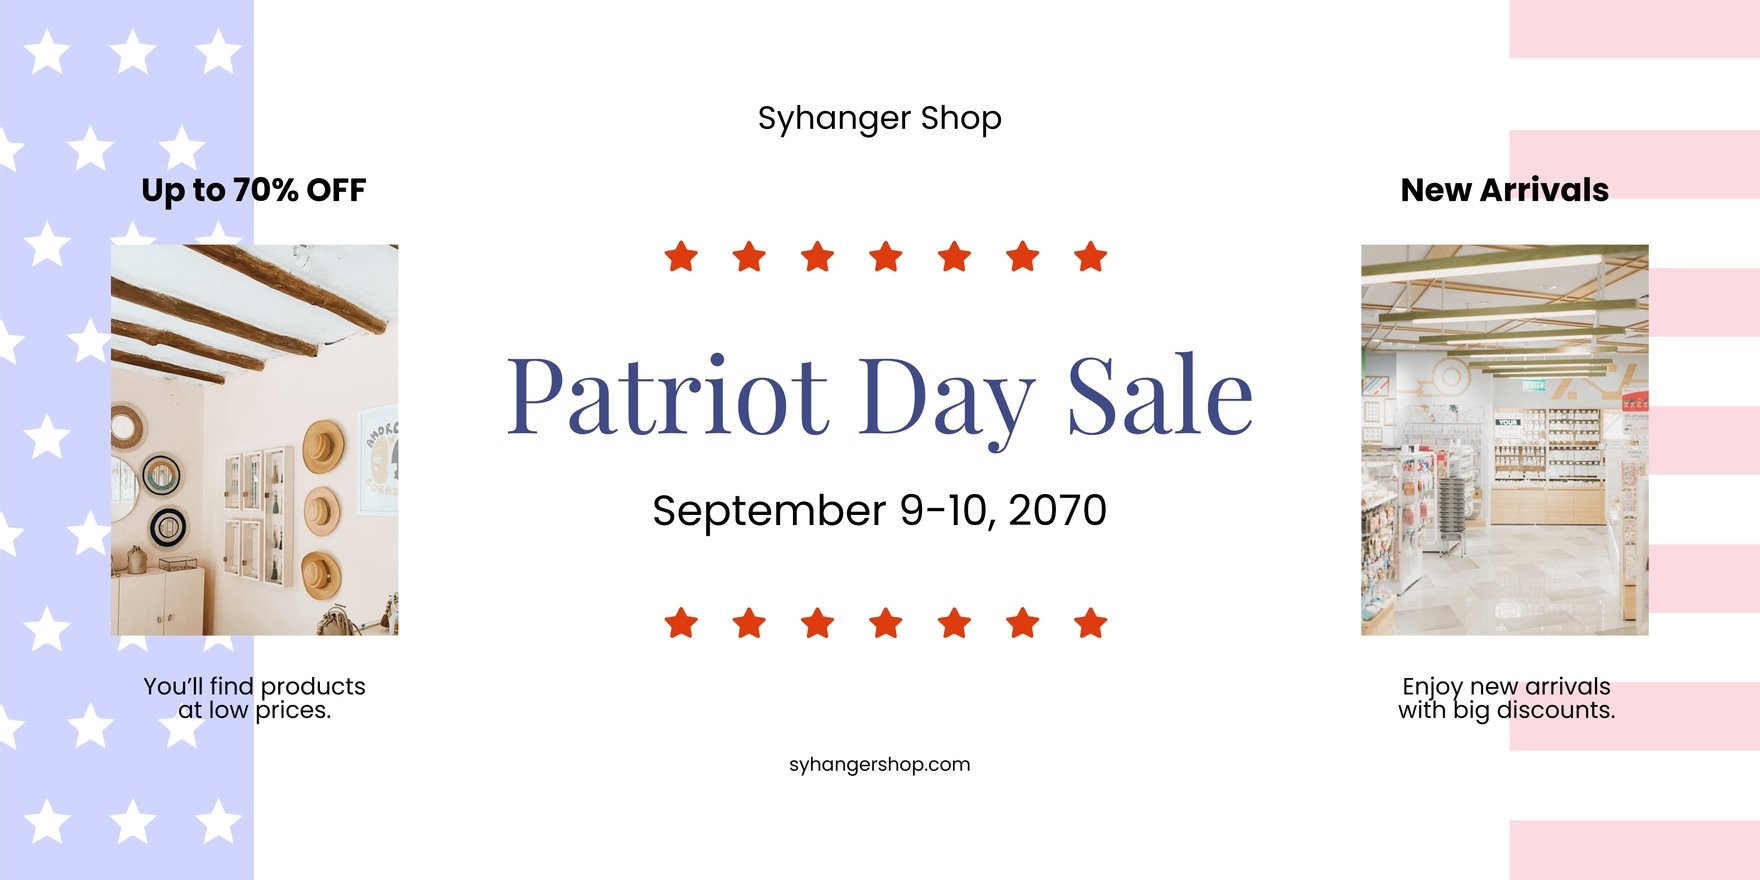 Free Patriot Day Promotion Banner Template in Word, Google Docs, Illustrator, PSD, Apple Pages, Publisher